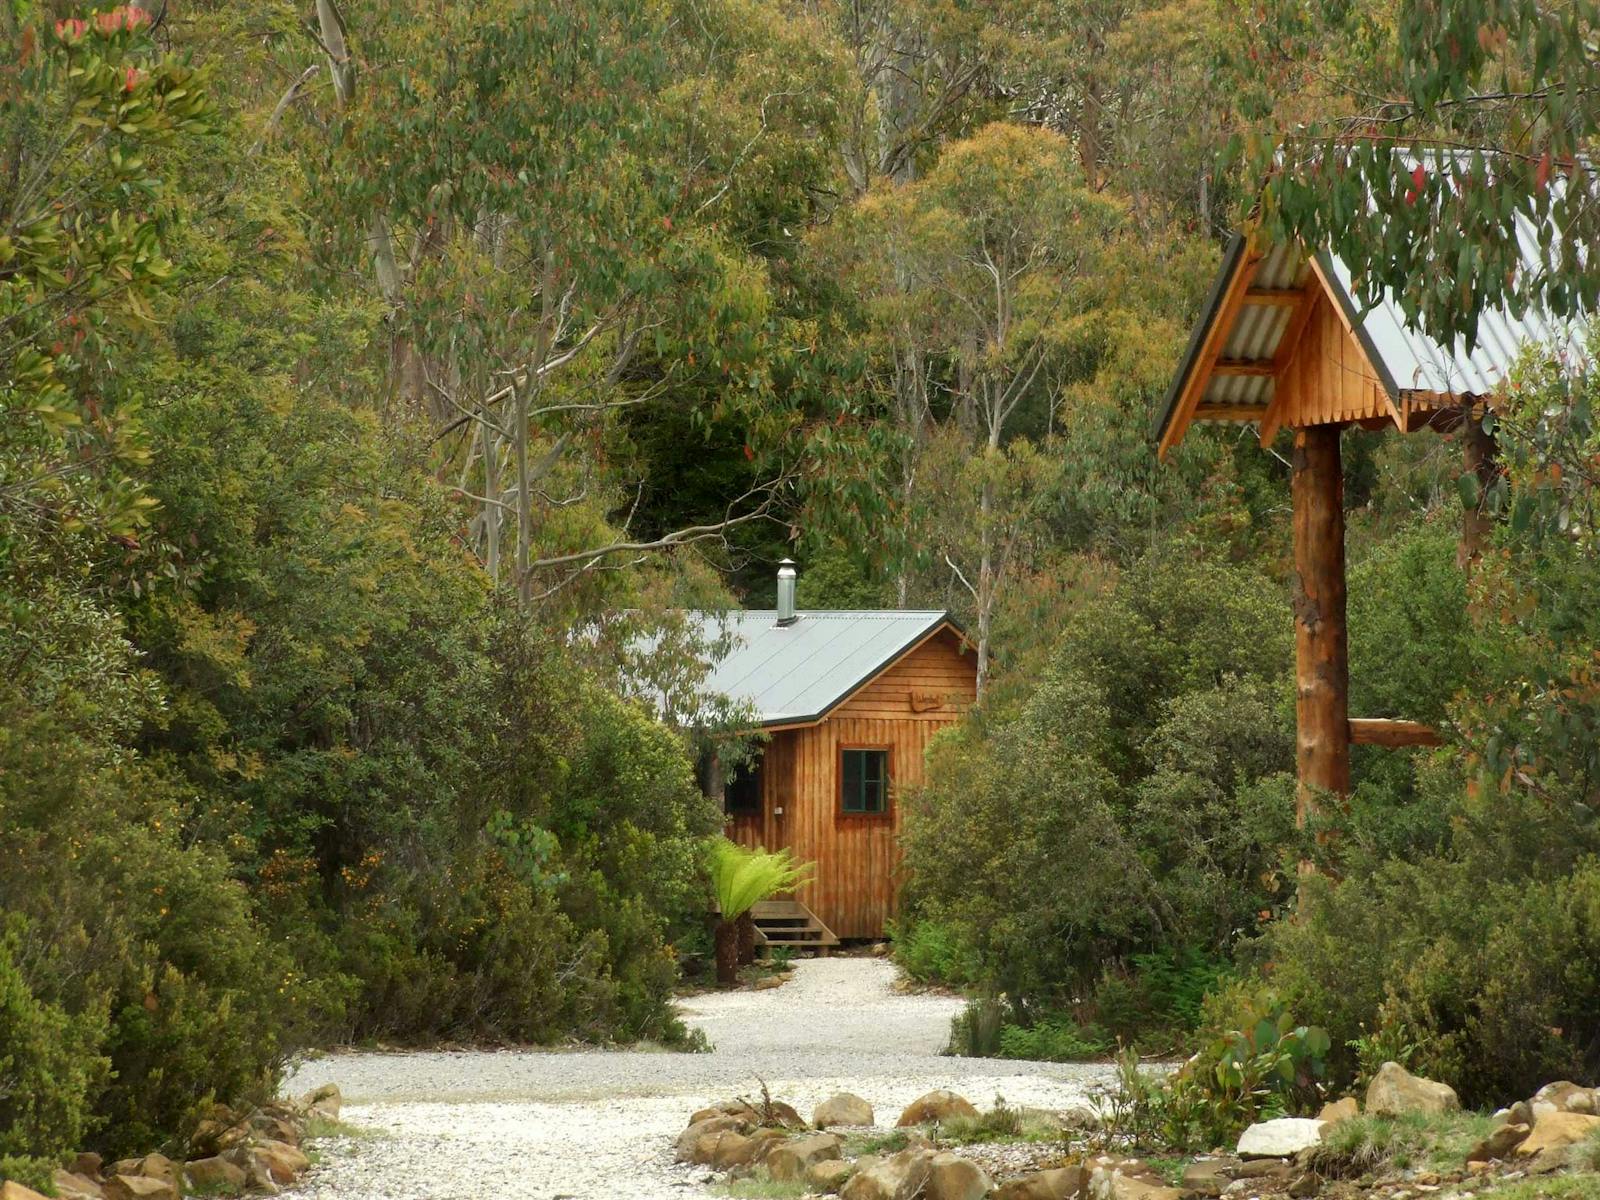 Open plan studio cabins offer cosy and warm cabin accommodation at Cradle Mountain